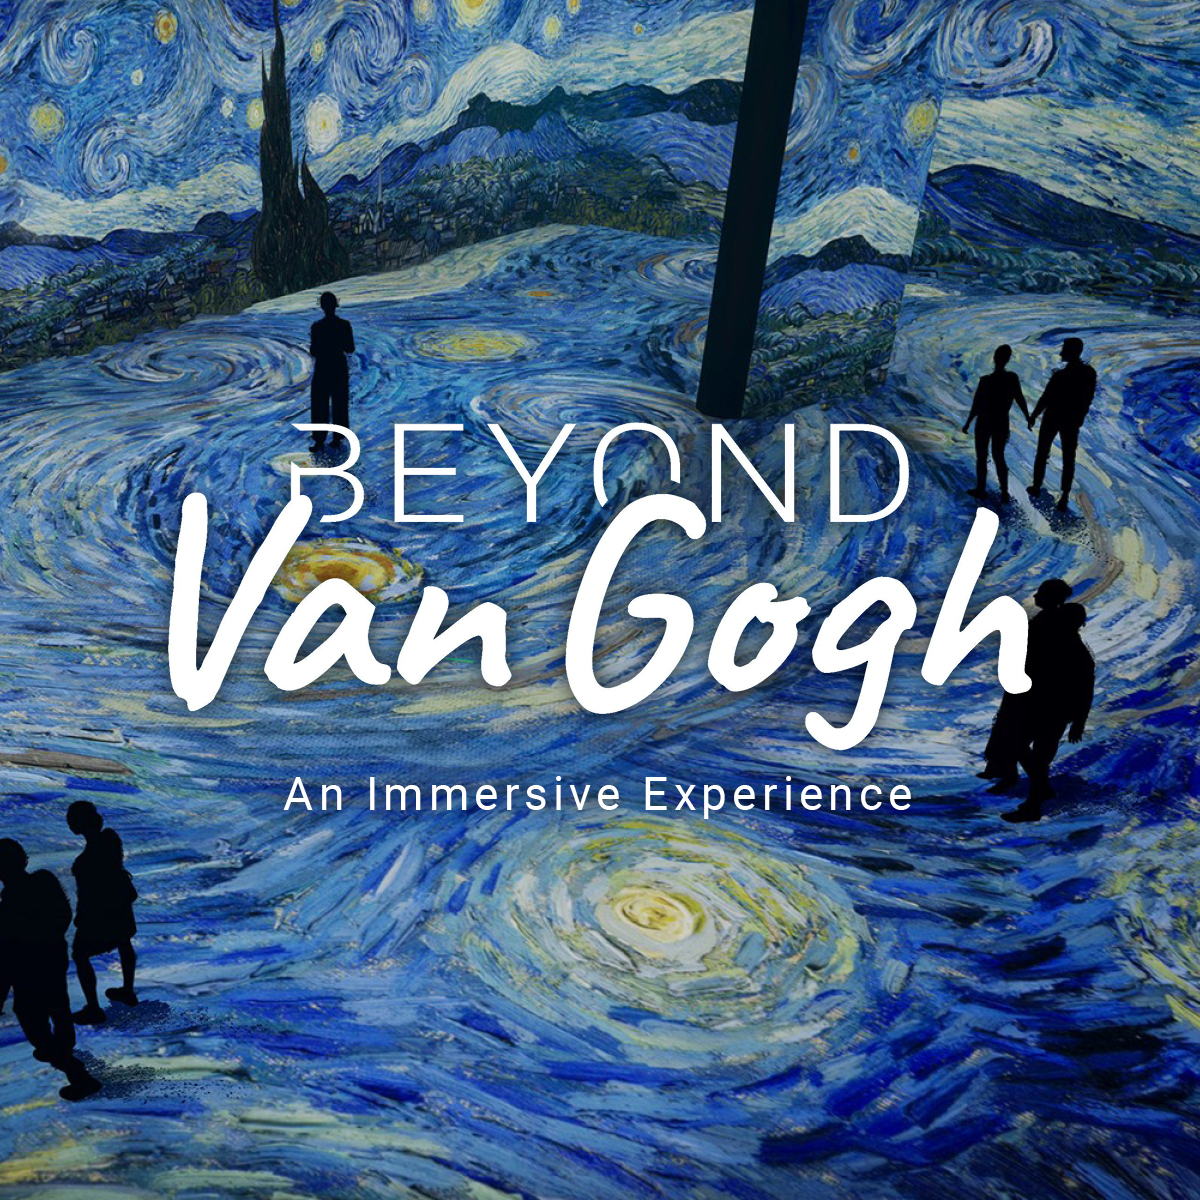 Beyond Van Gogh exceeds expectations for the Wisconsin Center